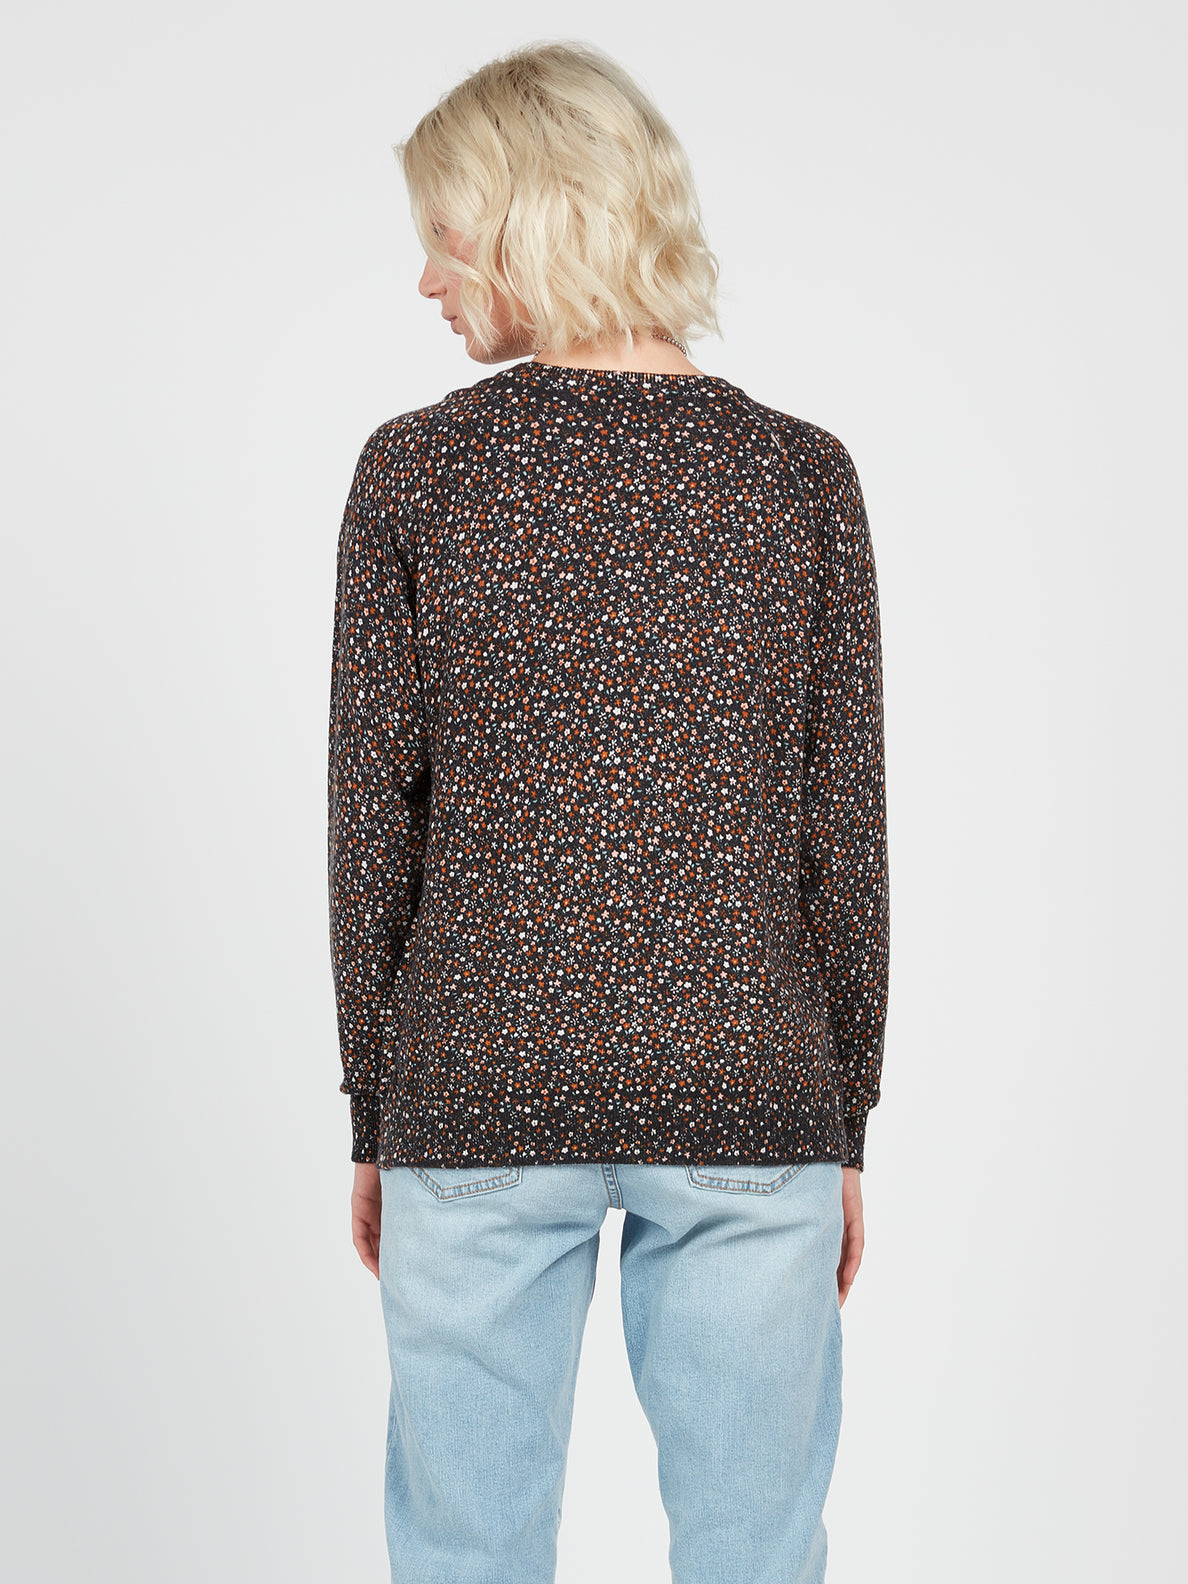 Over N Out Sweater - Black Floral Print (B0741909_BFP) [B]